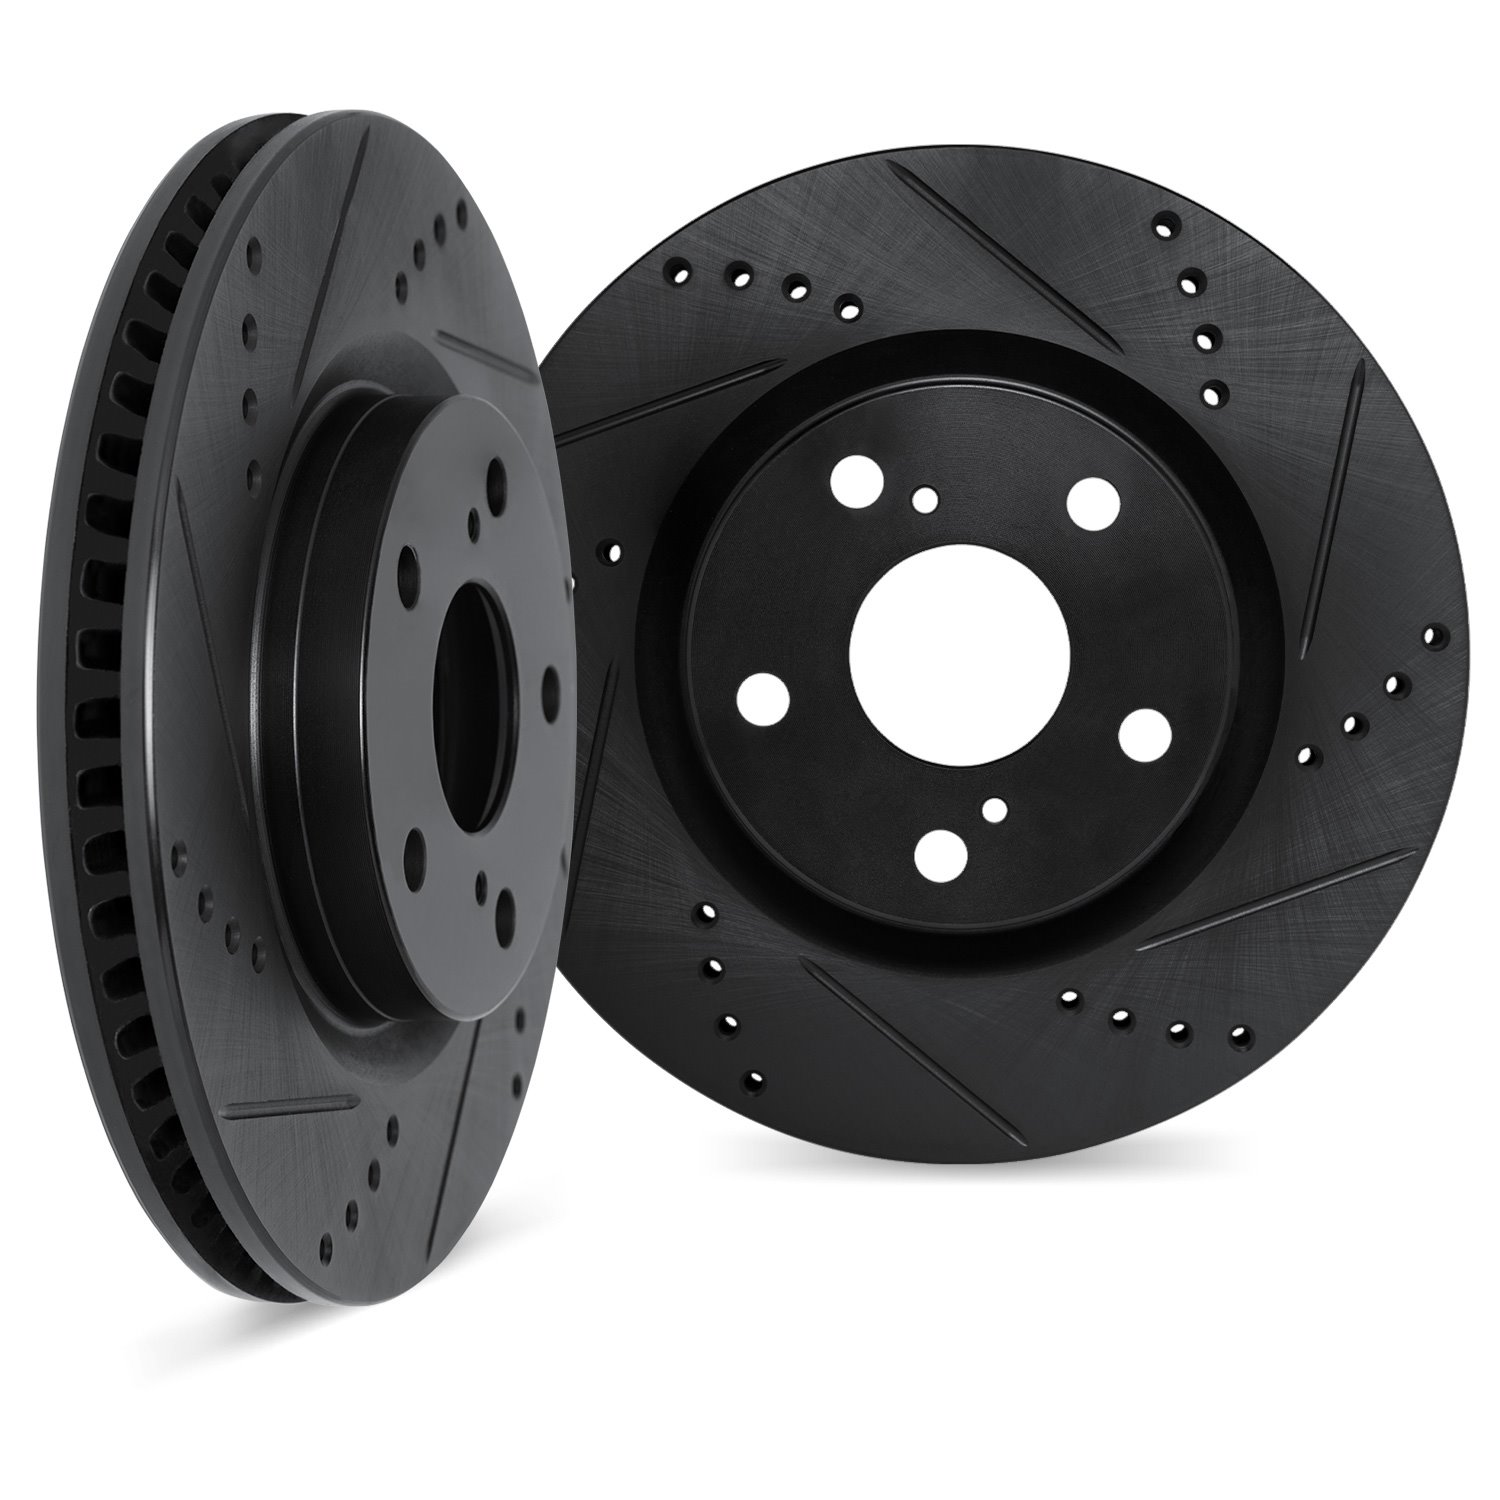 Drilled/Slotted Brake Rotors [Black], Fits Select Land Rover